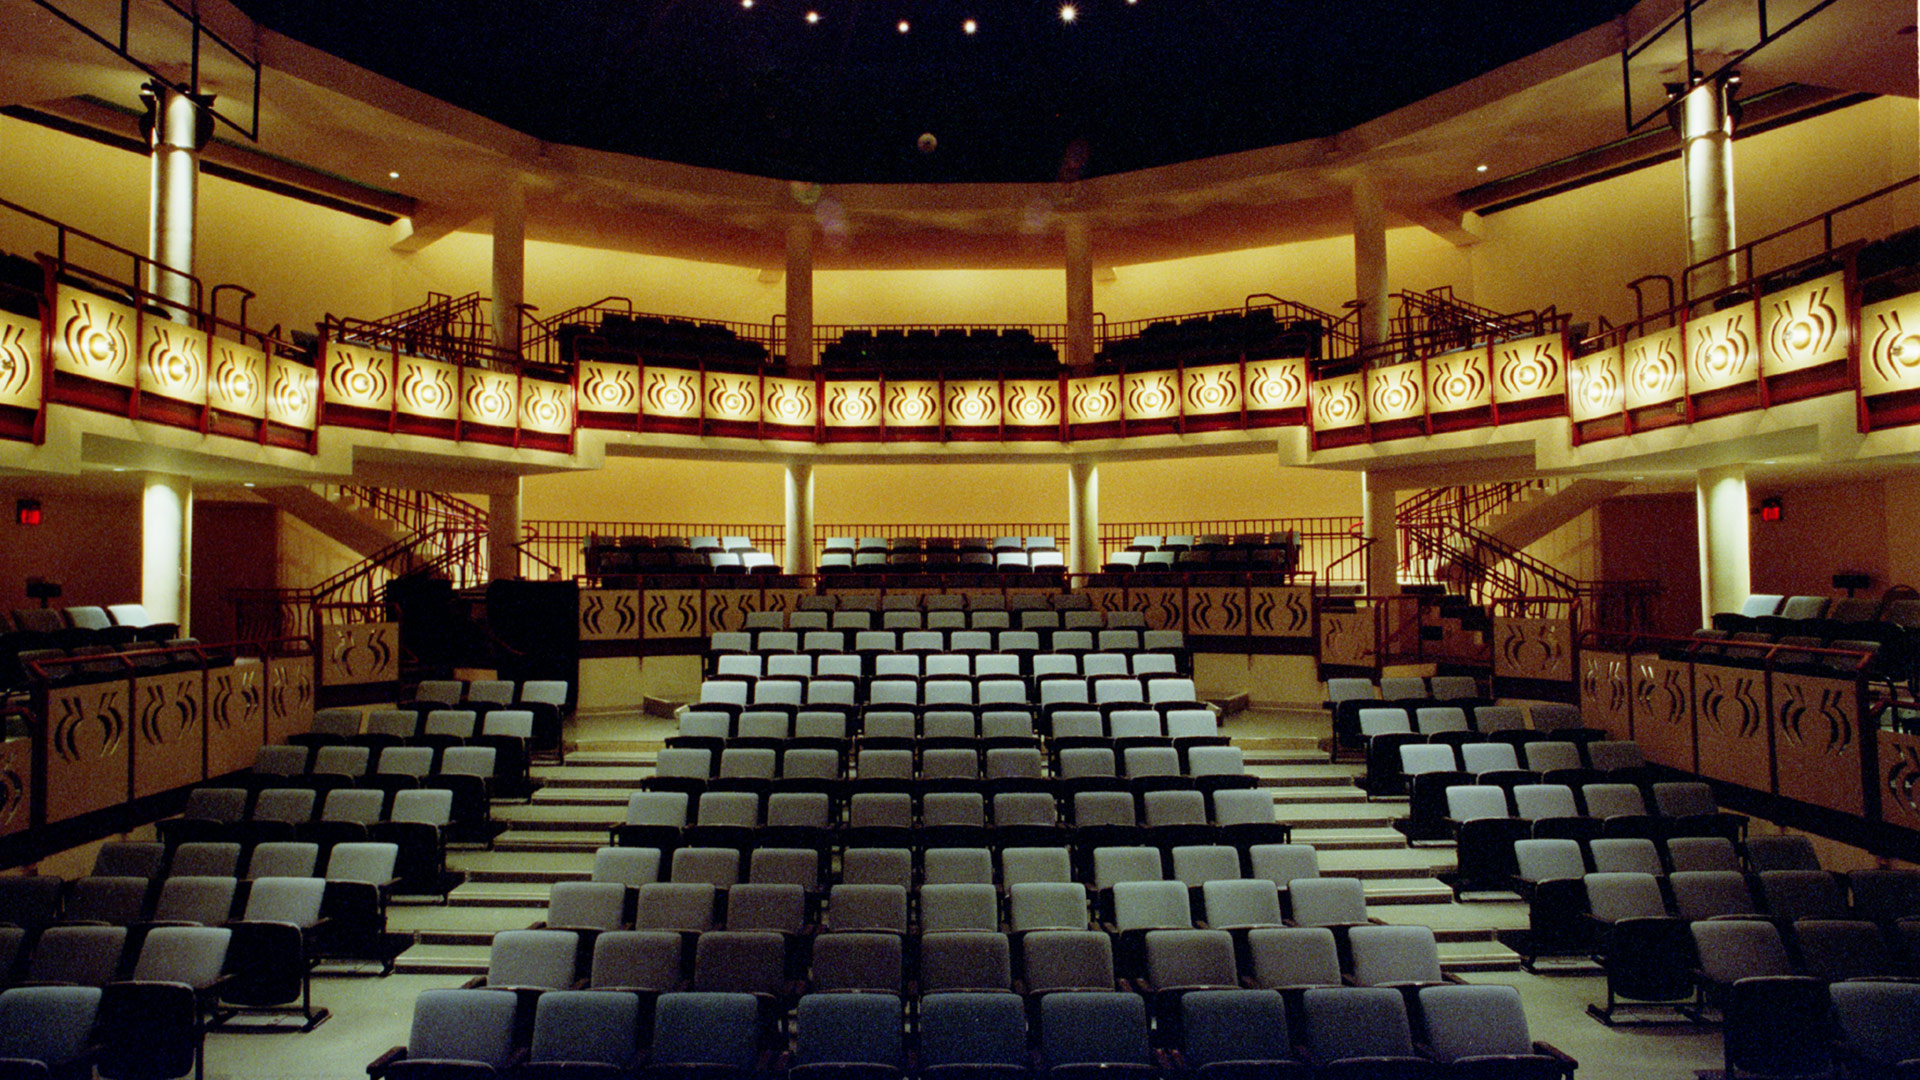 Whittier College, Ruth B. Shannon Center for the Performing Arts